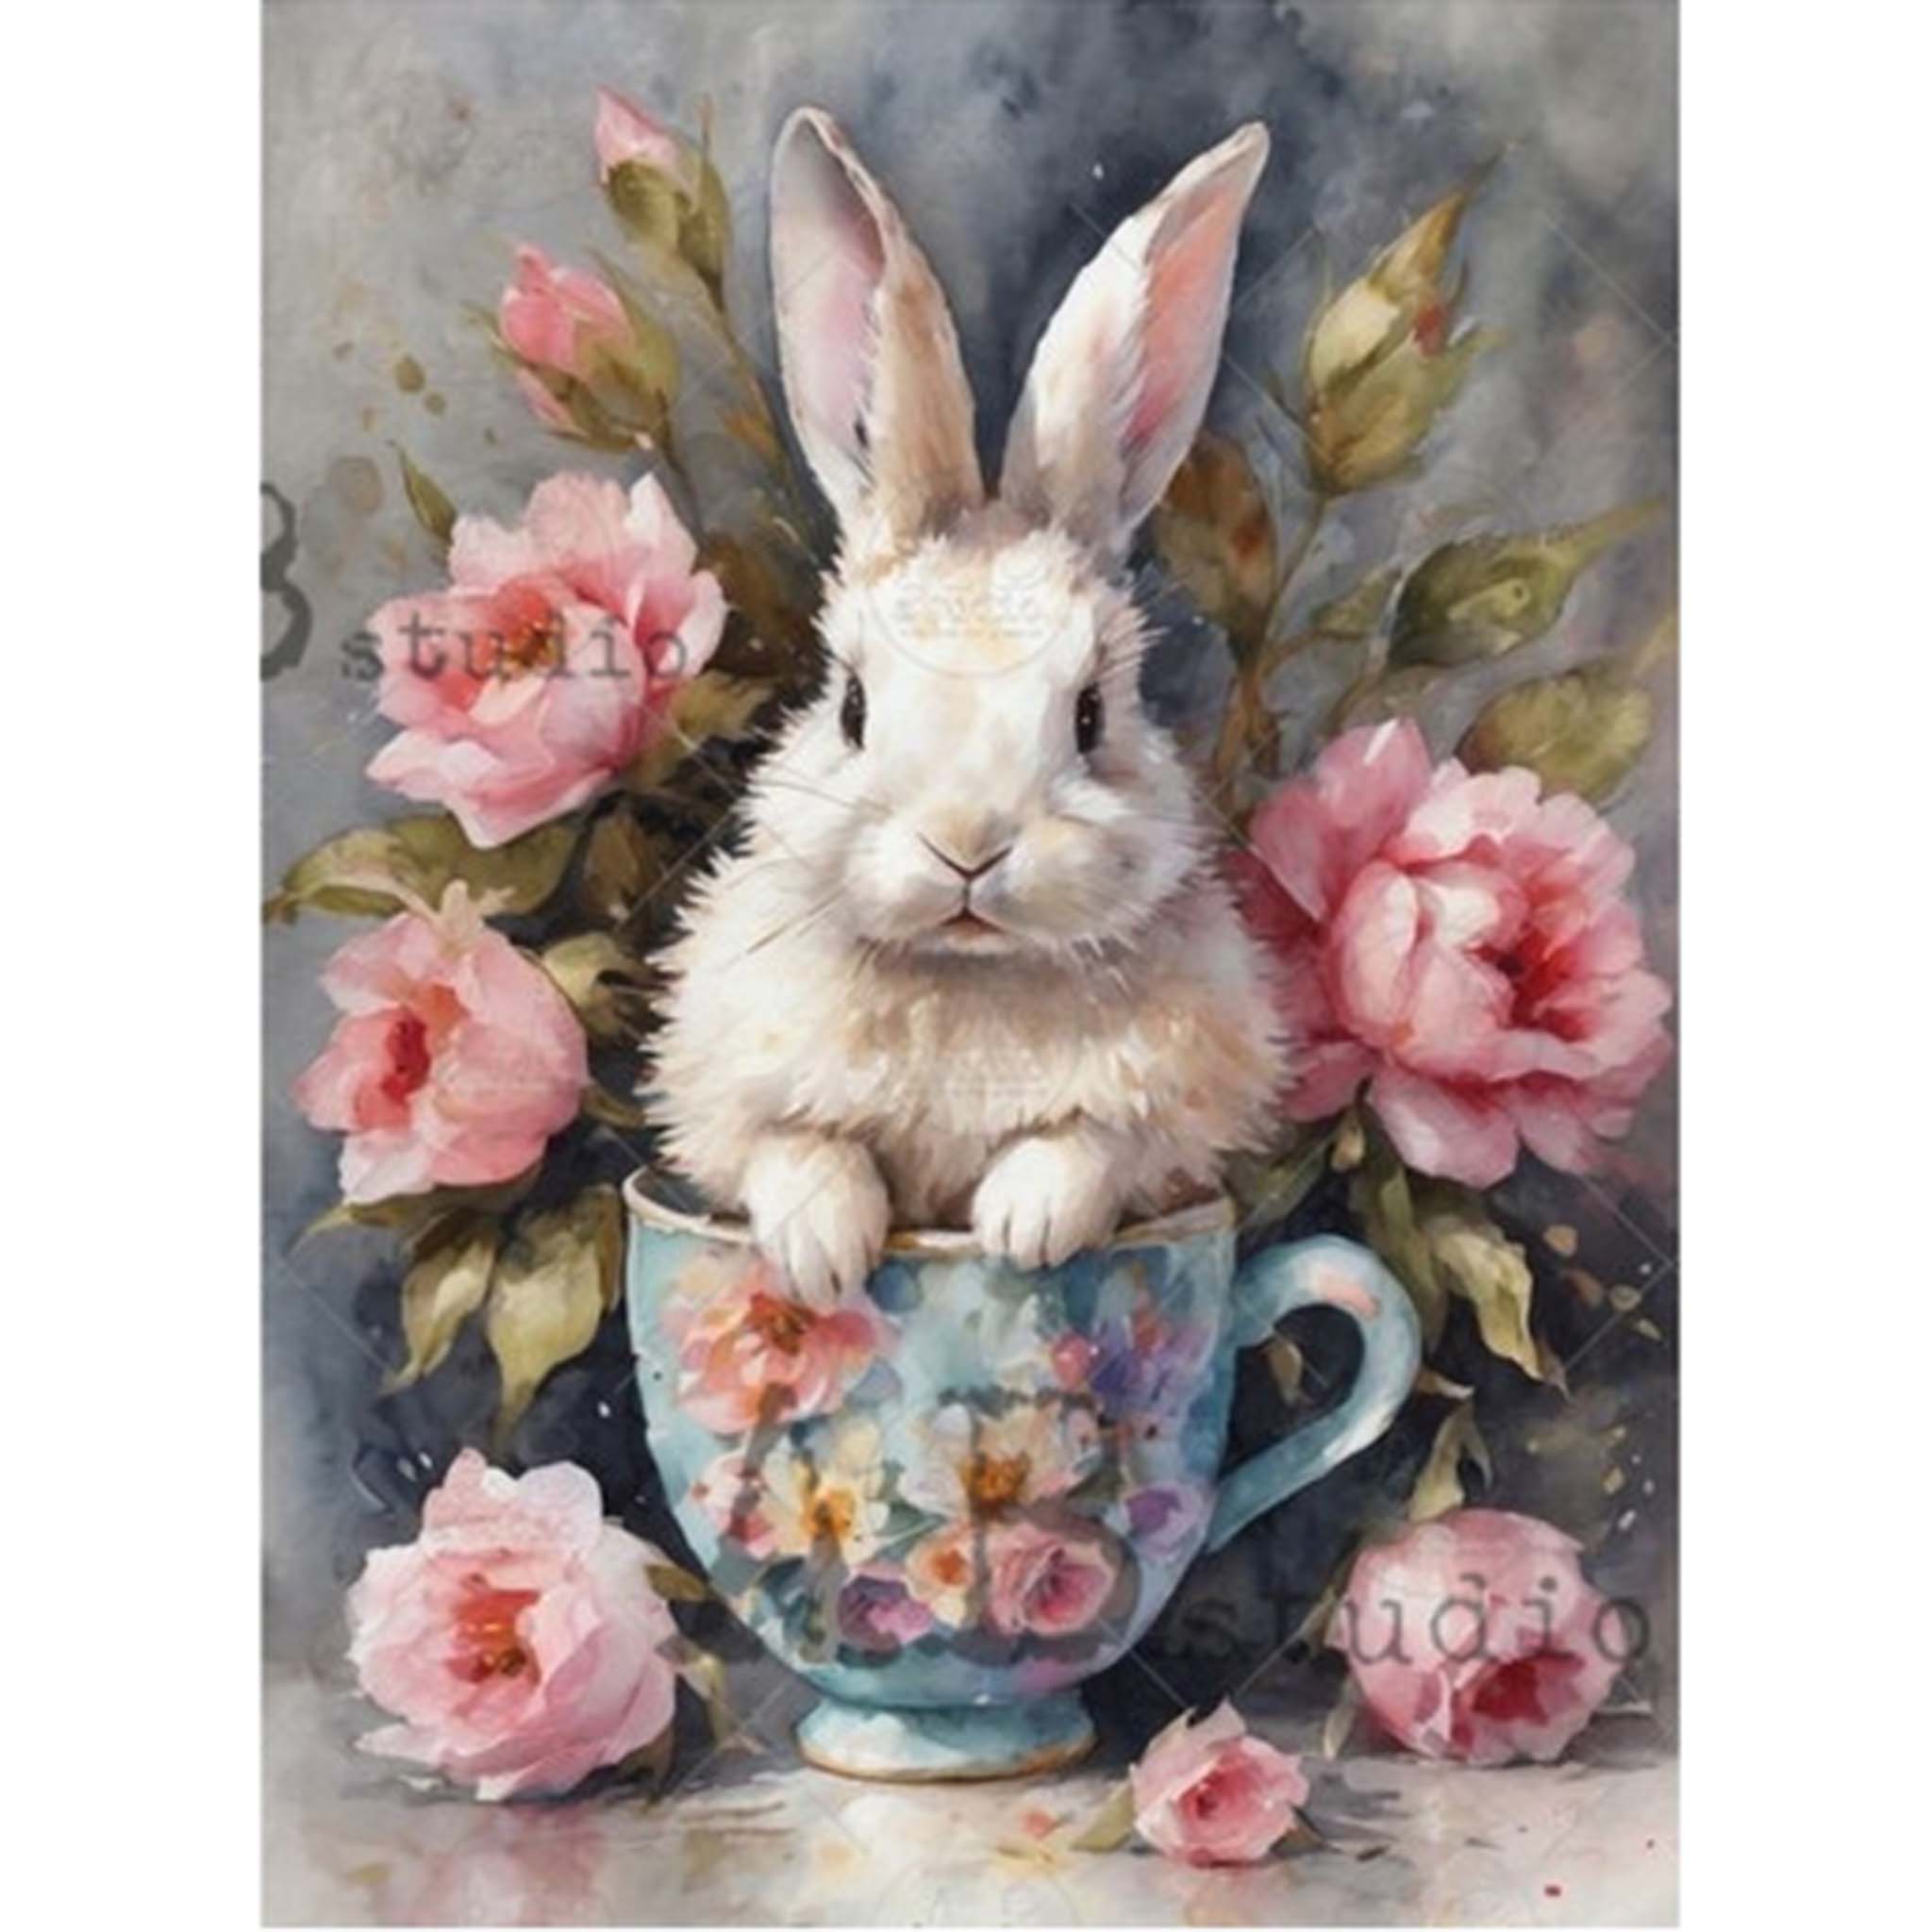 A4 rice paper design featuring a whimsical bunny in a teacup surrounded by pink roses. White borders are on the sides.